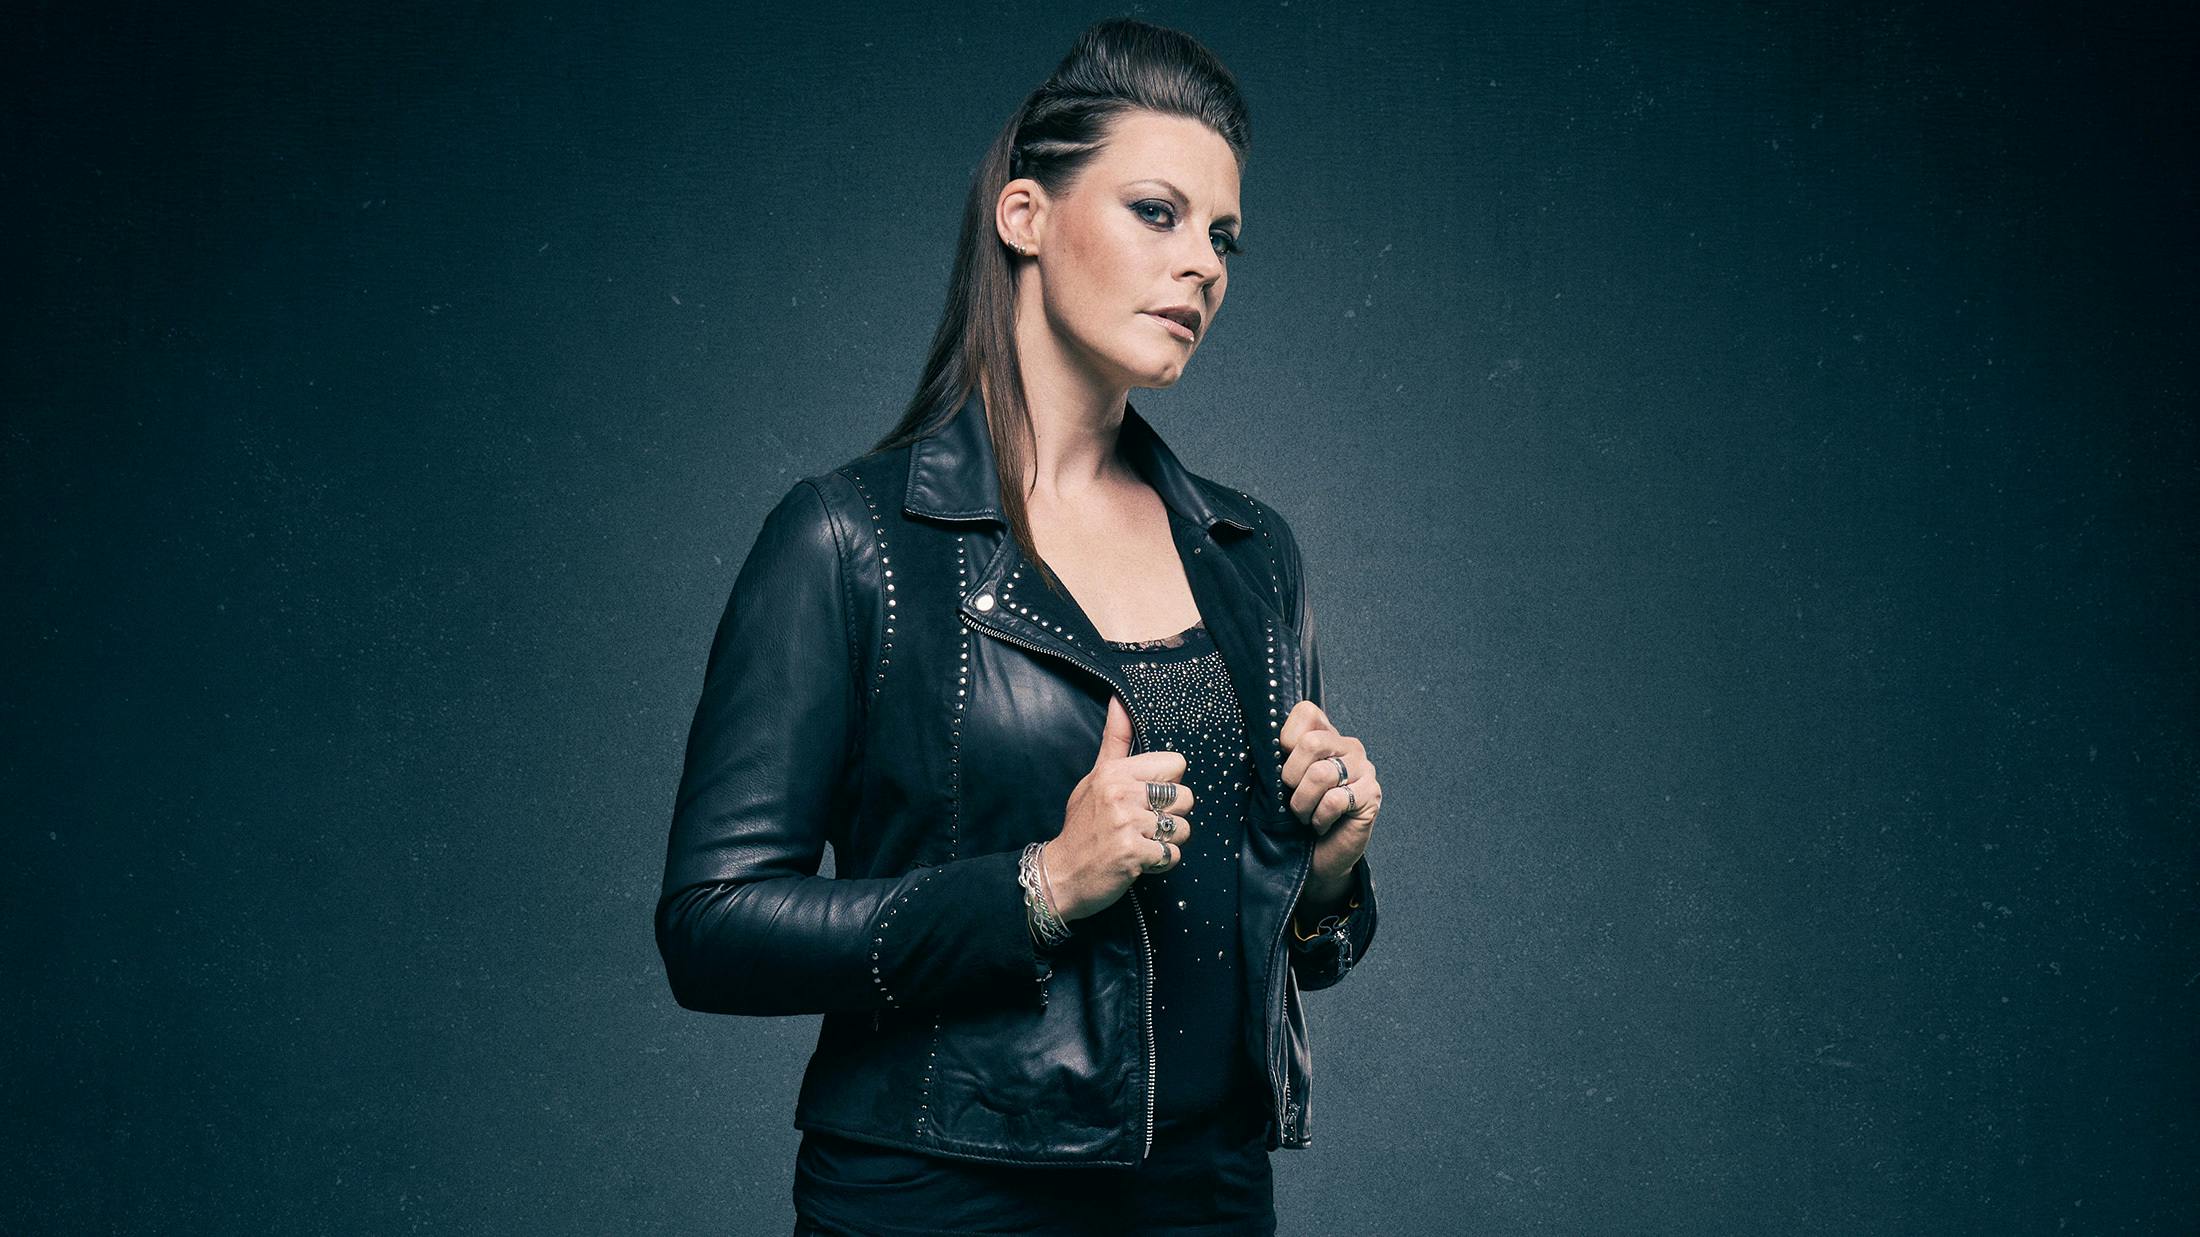 Floor Jansen is “recovering well” after breast cancer surgery